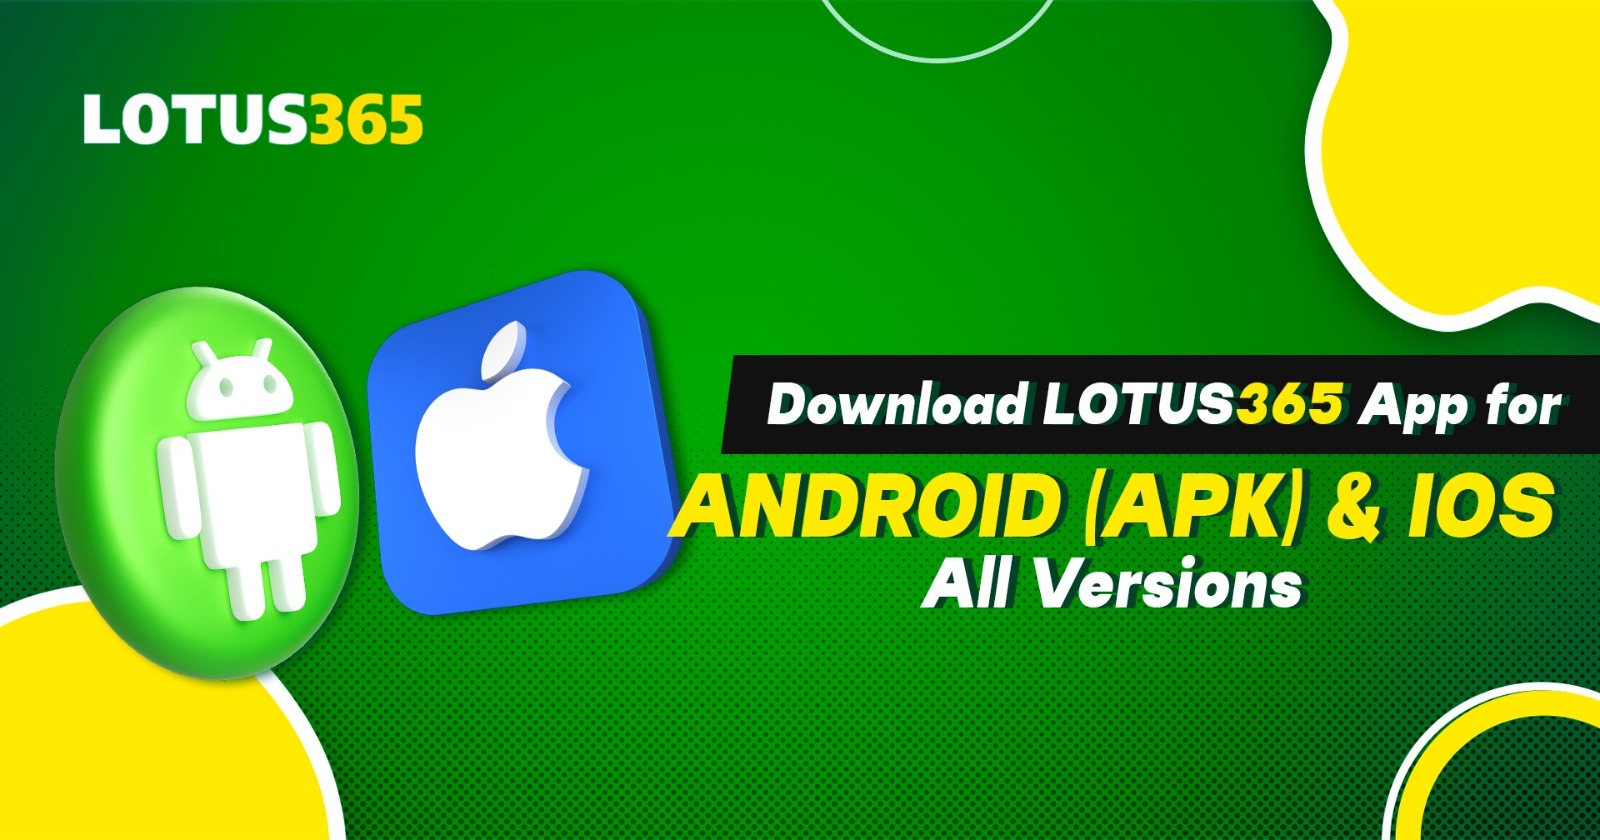 Download Lotus365 App for Android (APK) and iOS